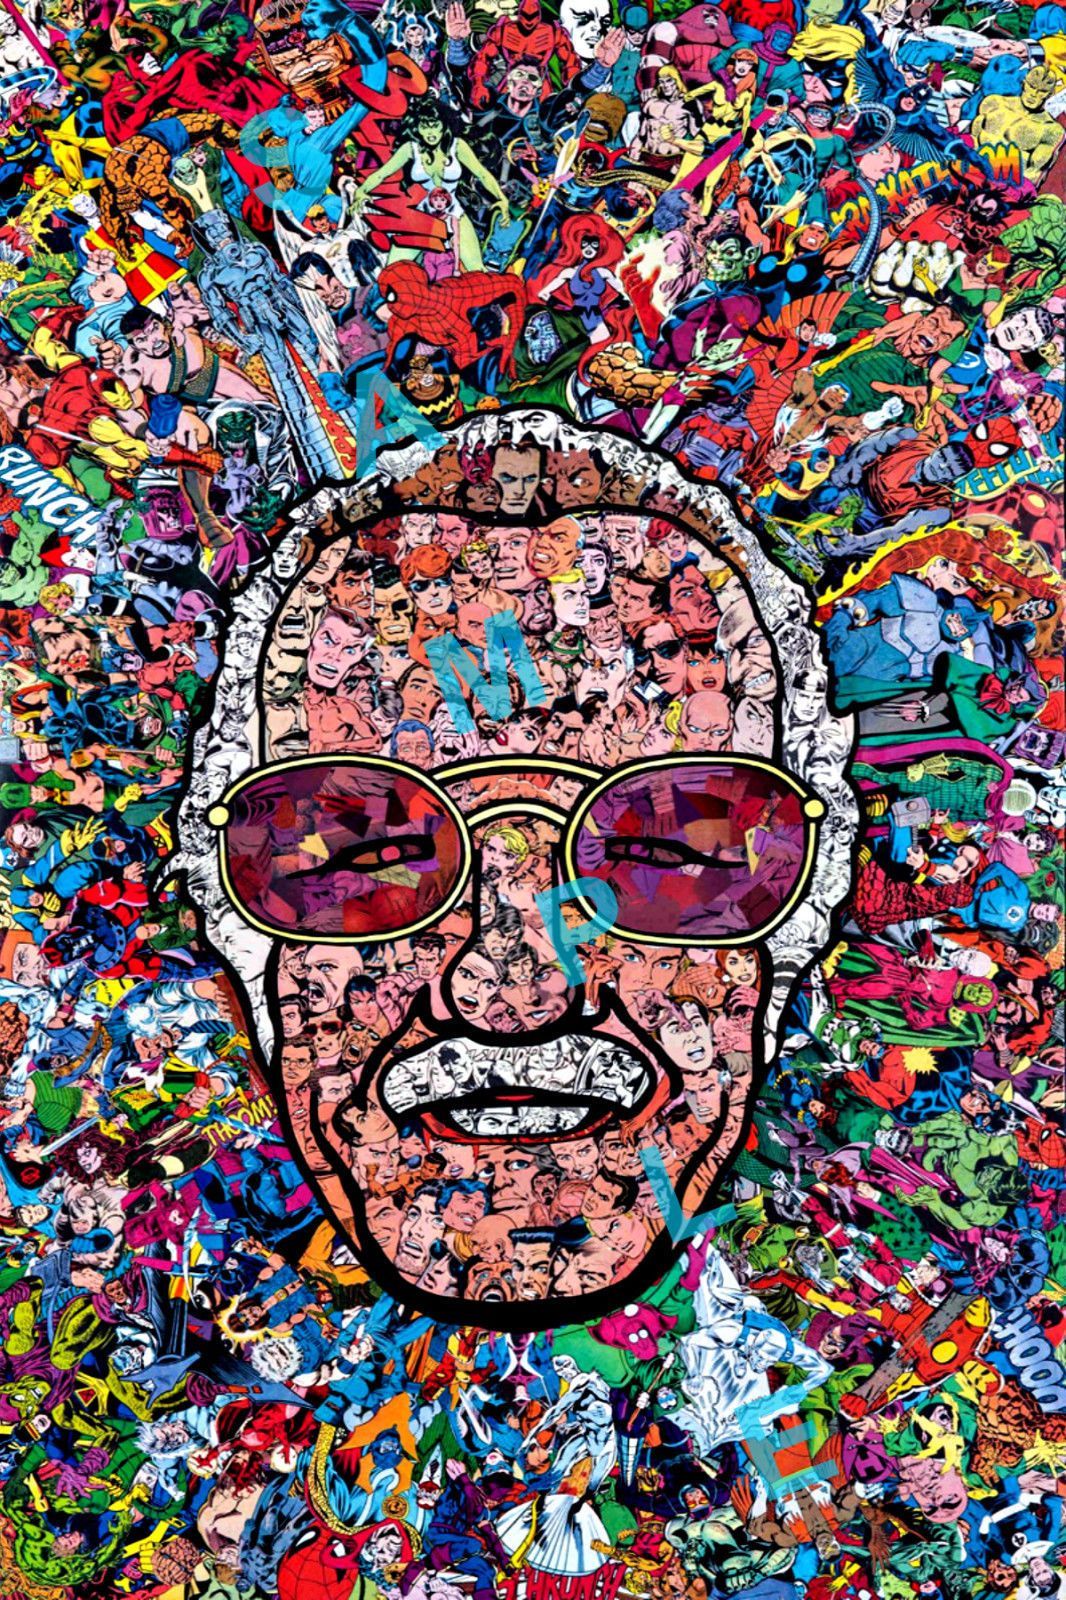 Details about STAN LEE 12x18 HEROES FACES ART POSTER SPIDERMAN